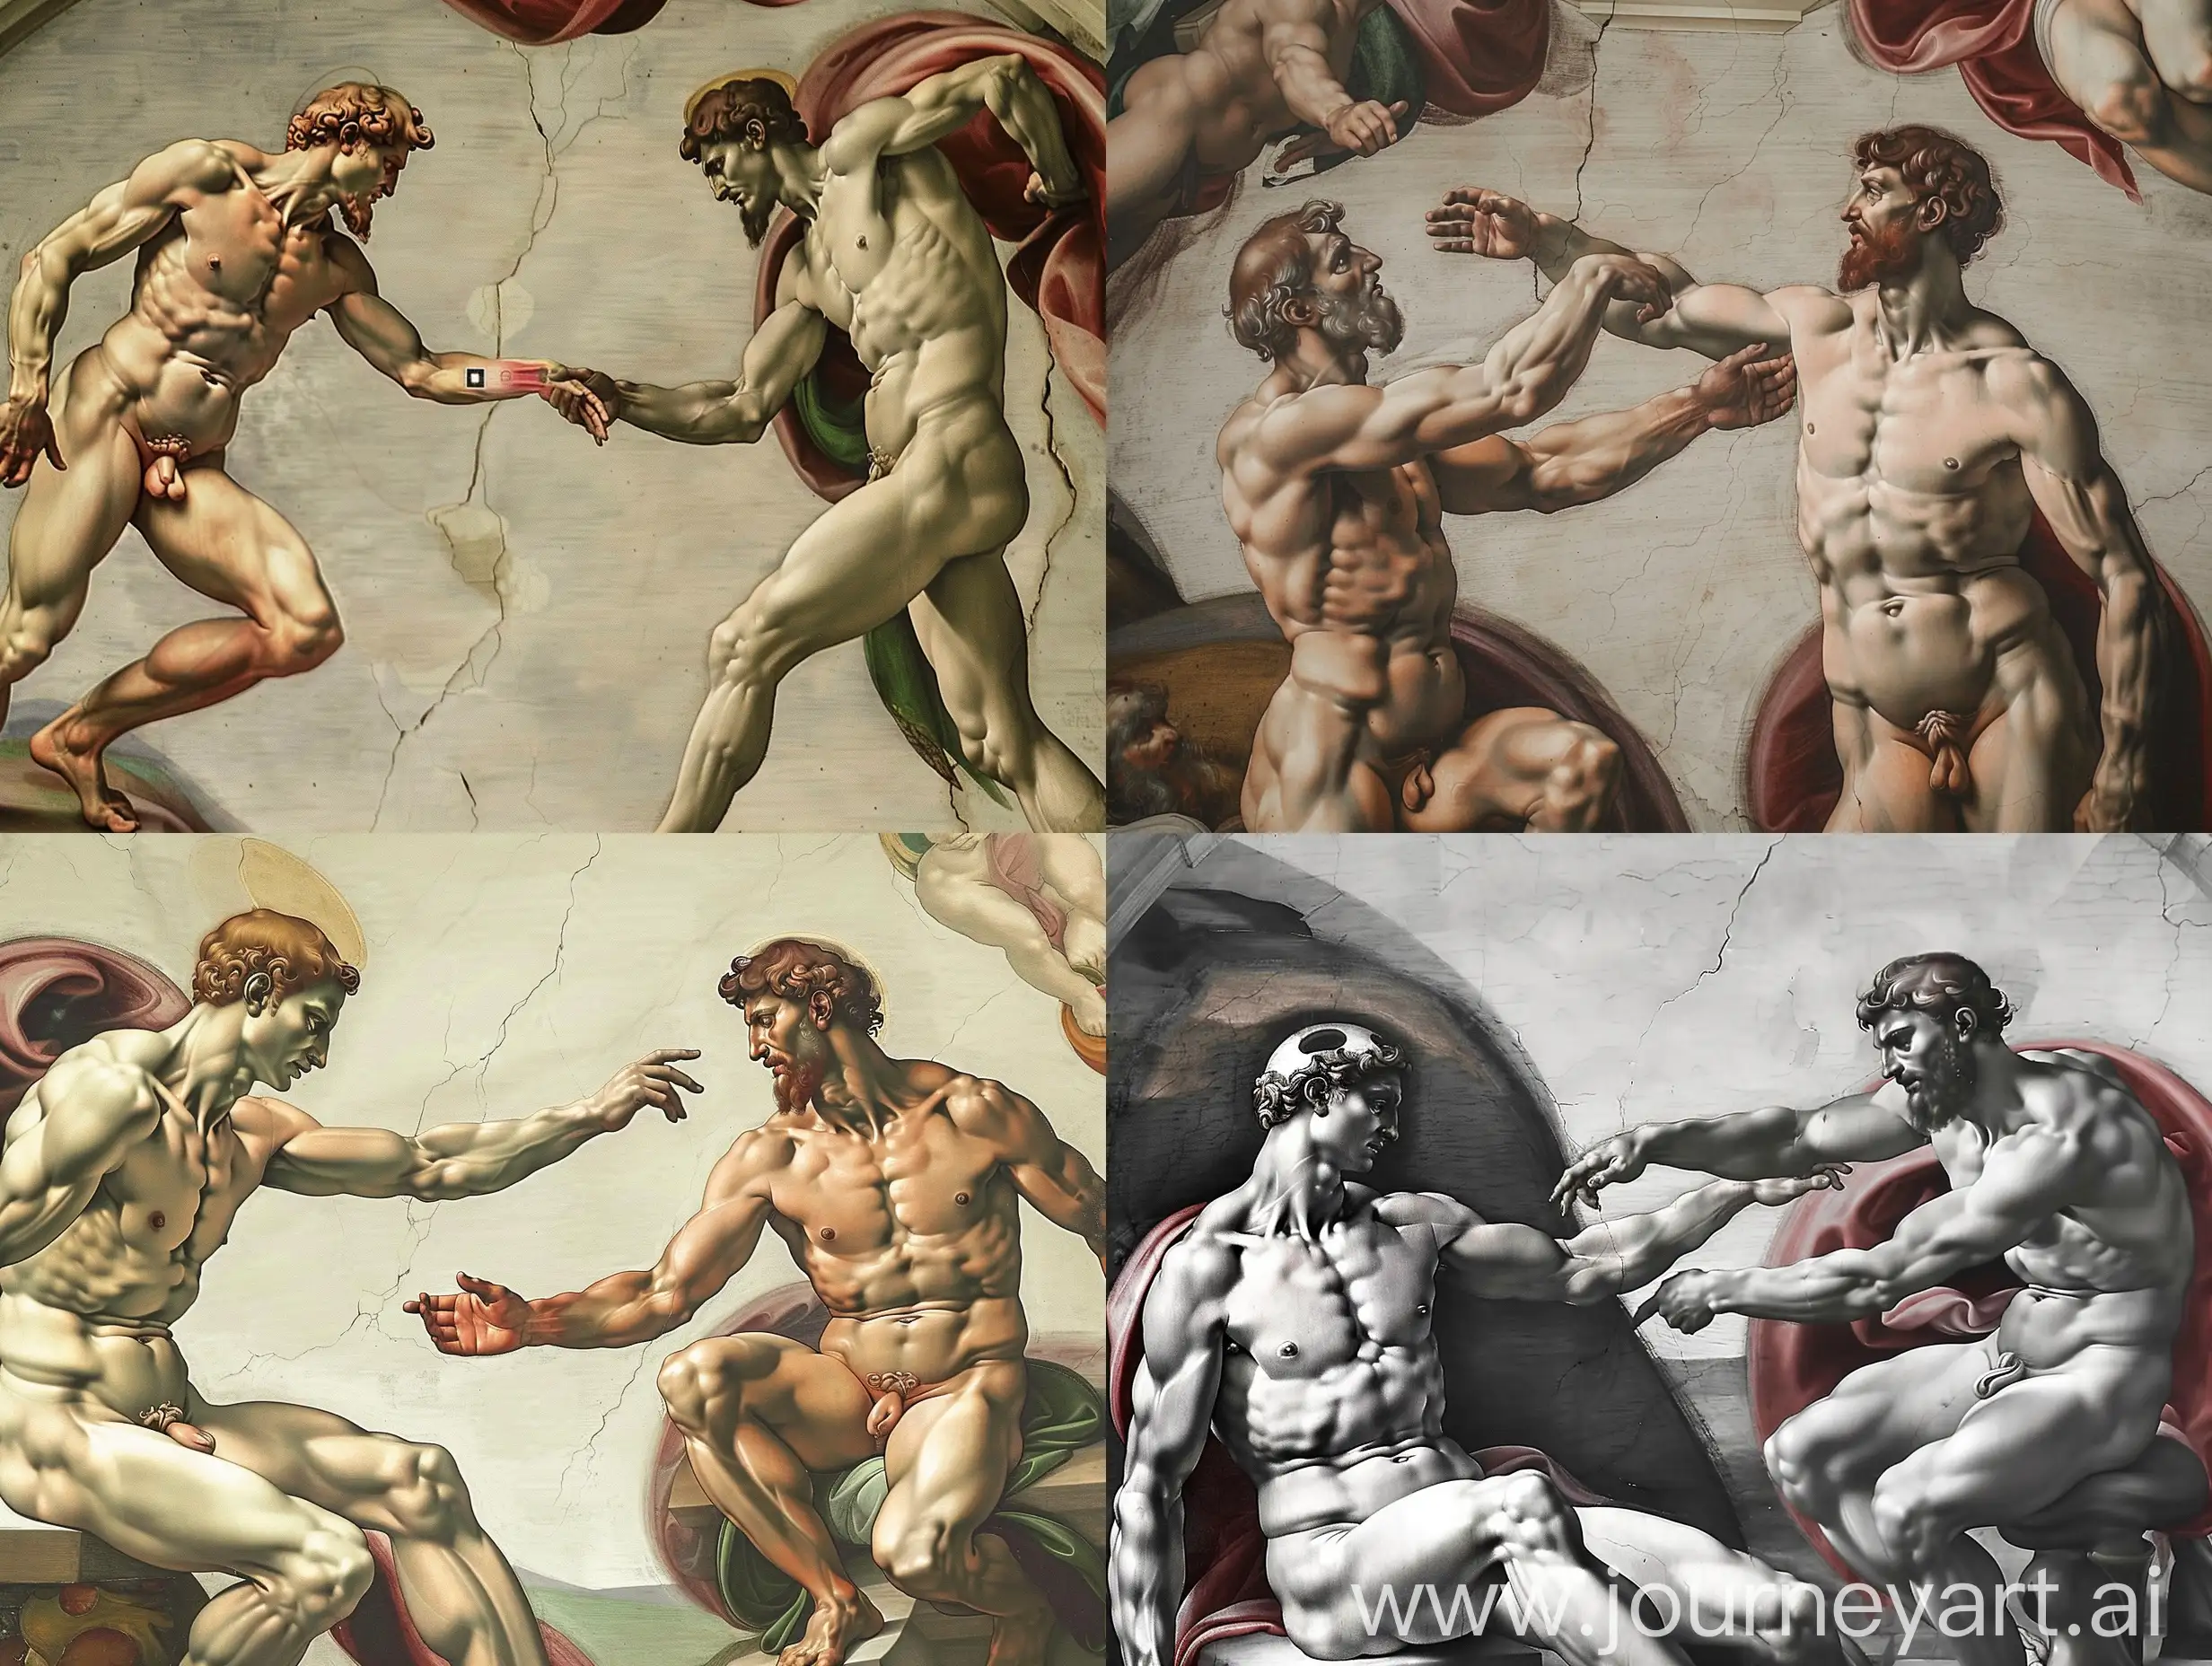 Create a picture in good quality that shows two characters: 
1-Robot - which reflects artificial intelligence.
2-Human - a man of 25-35 years old, with a small beard.

Both characters are in the same pose as in  Michelangelo's painting “The Birth of Adam”. Emphasize their interactions.